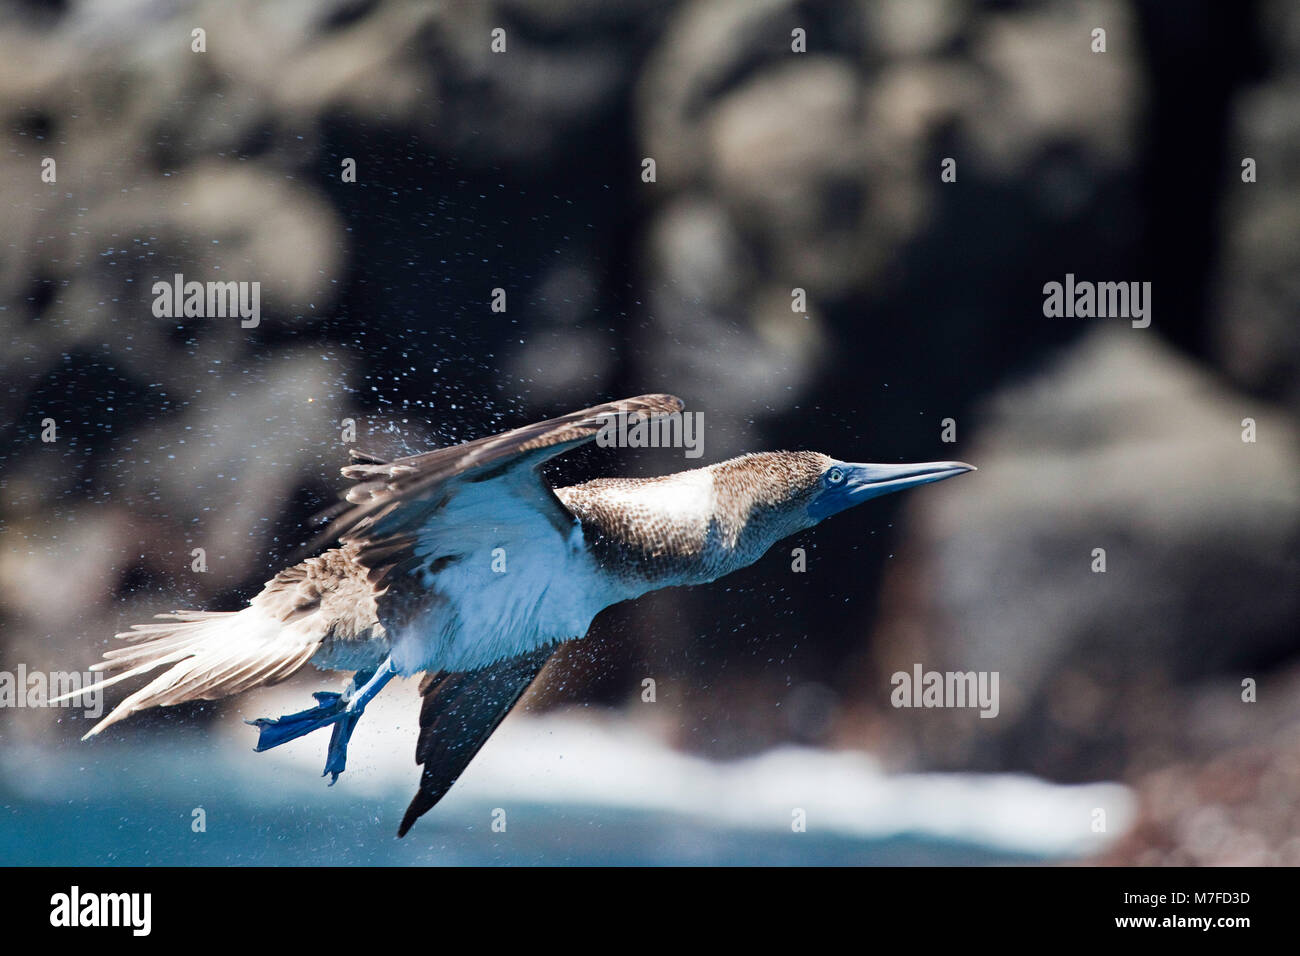 A blue footed booby, Sula nebouxii excisa, shakes of sea water after taking flight off Santa Fe island, Galapagos Islands, Equador. Stock Photo